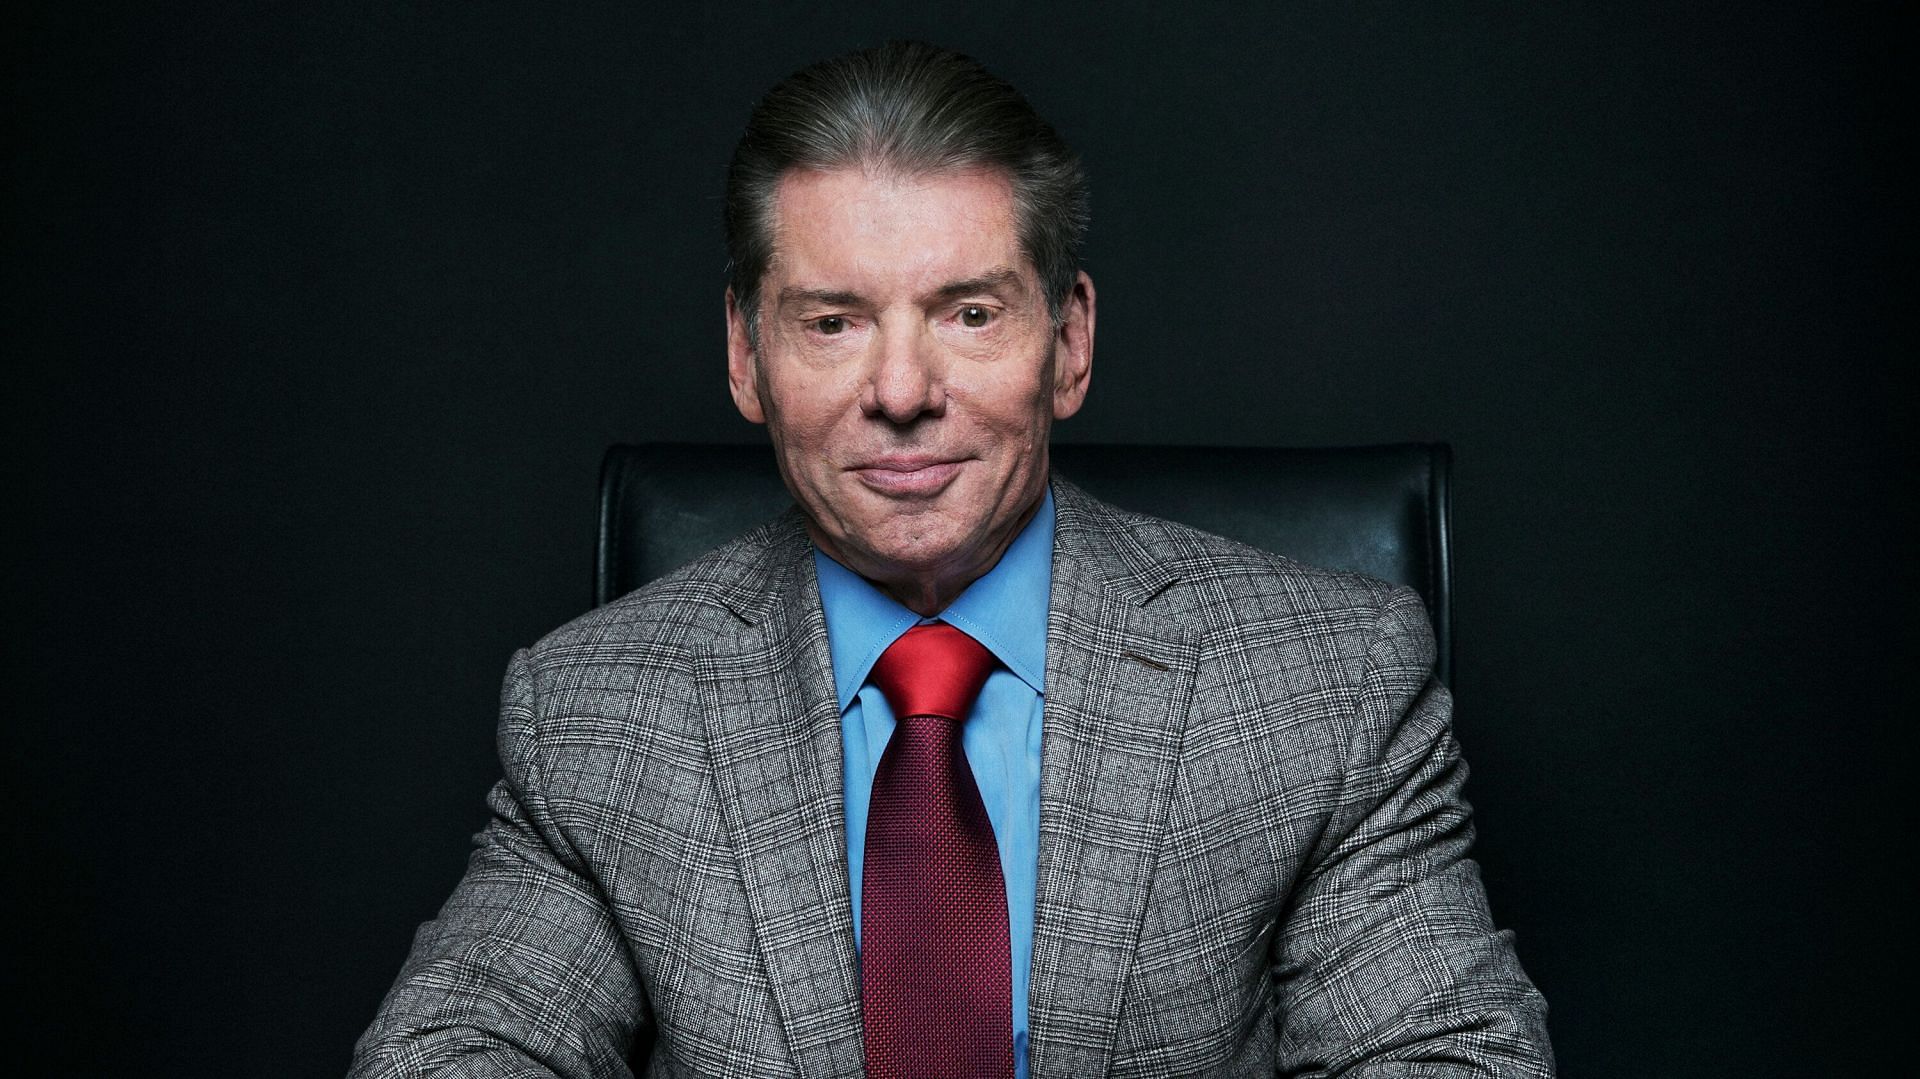 Vince McMahon is still involved with WWE, believes Hall of Famer